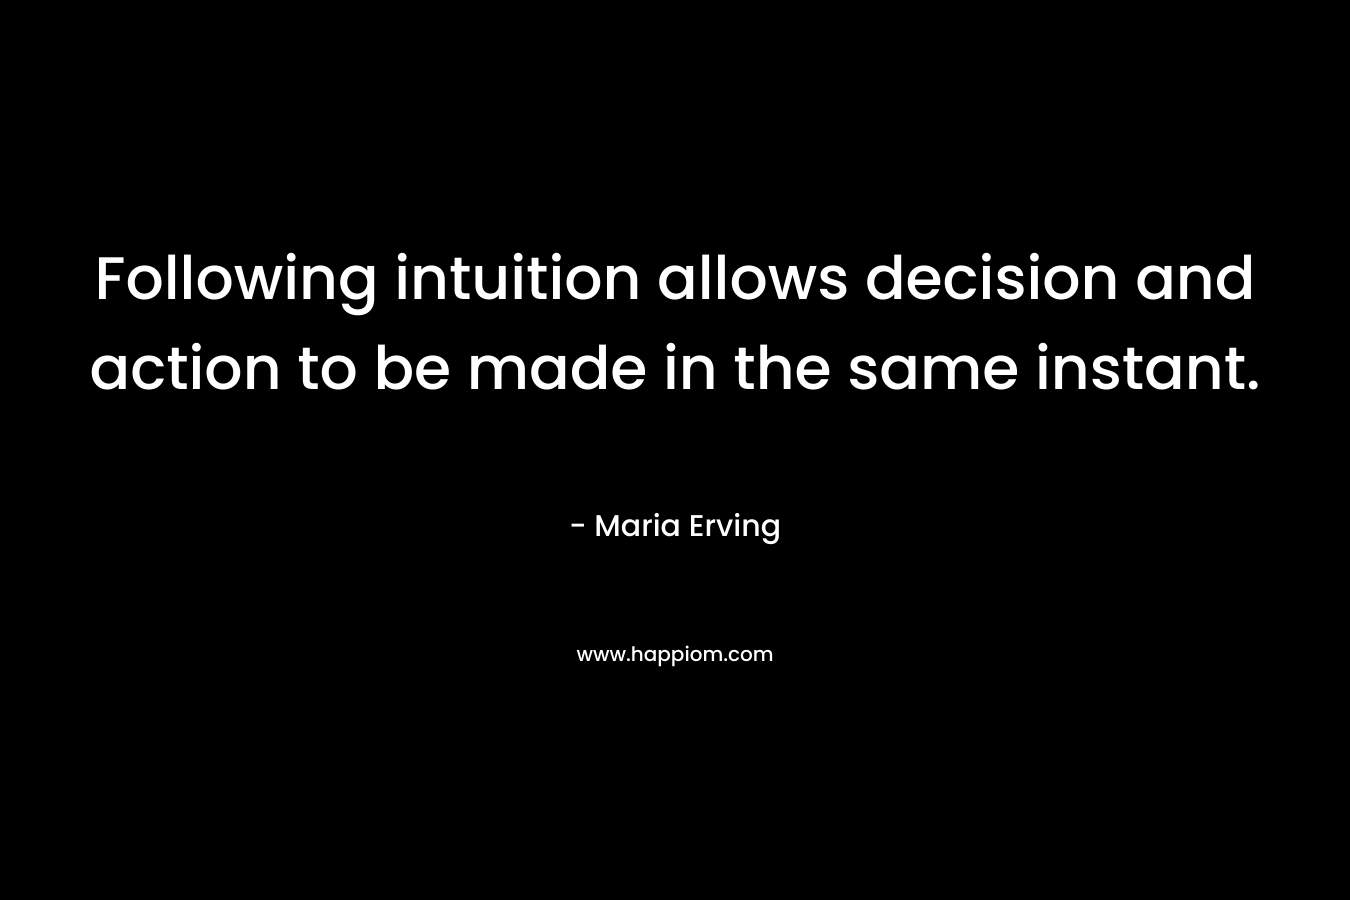 Following intuition allows decision and action to be made in the same instant. – Maria Erving